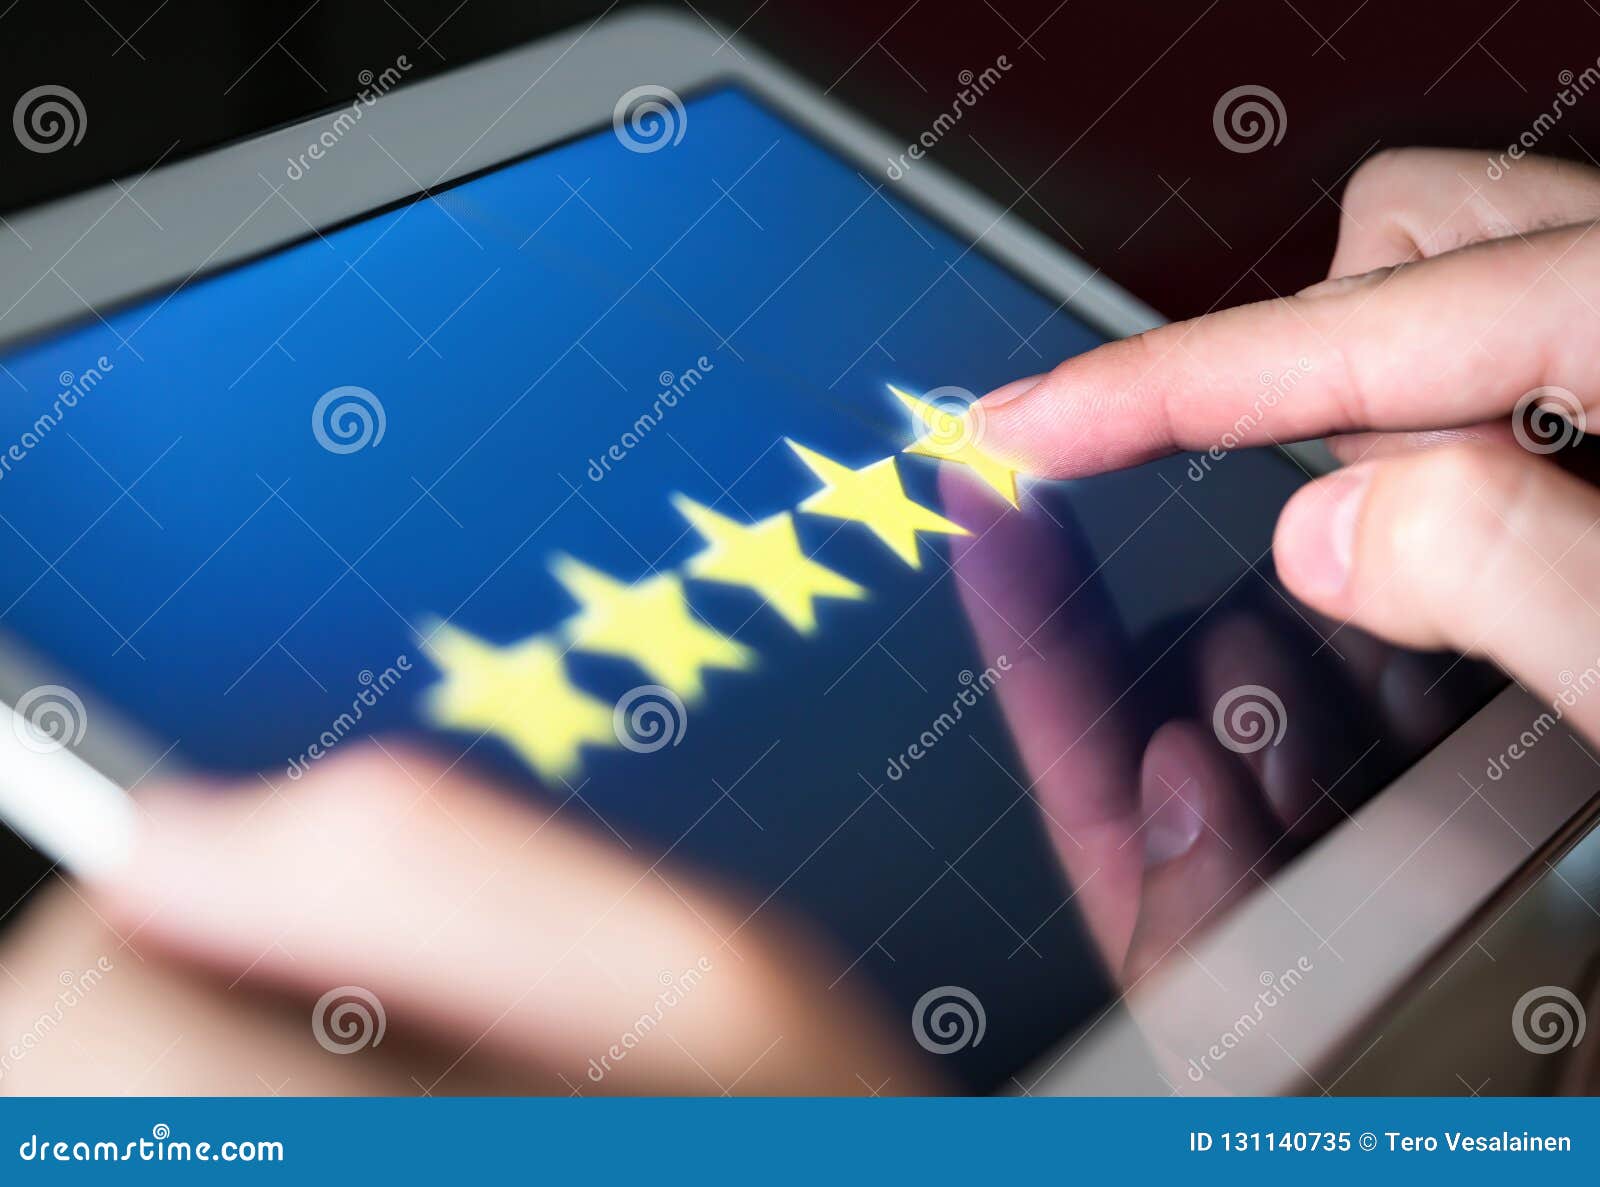 5 star rating or review in survey, poll, questionnaire or customer satisfaction research.